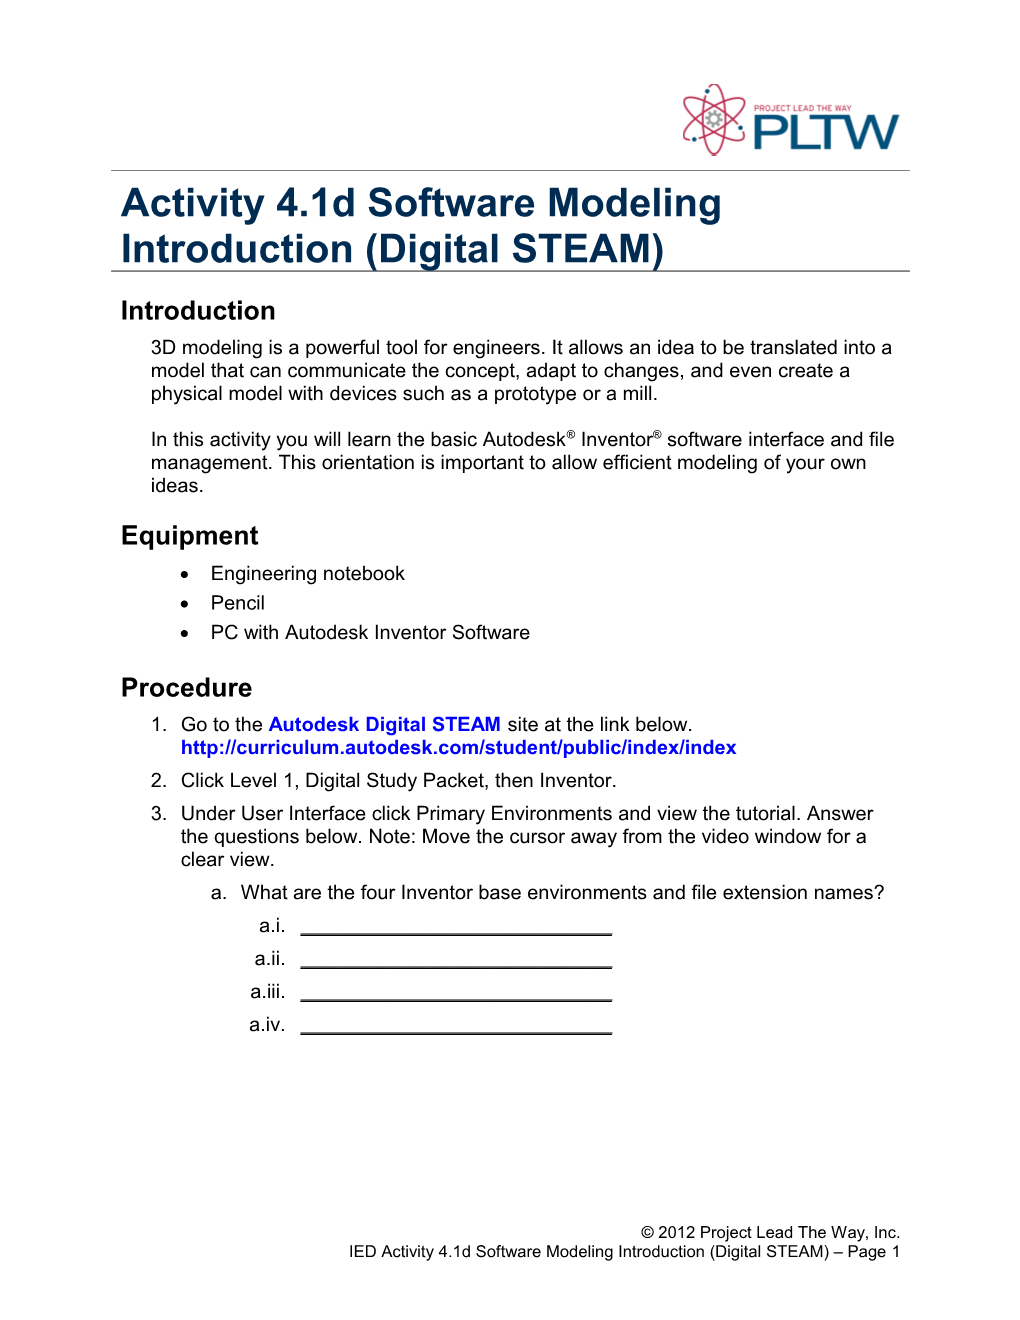 Activity 4.1D Software Modeling Introduction (Digital STEAM)